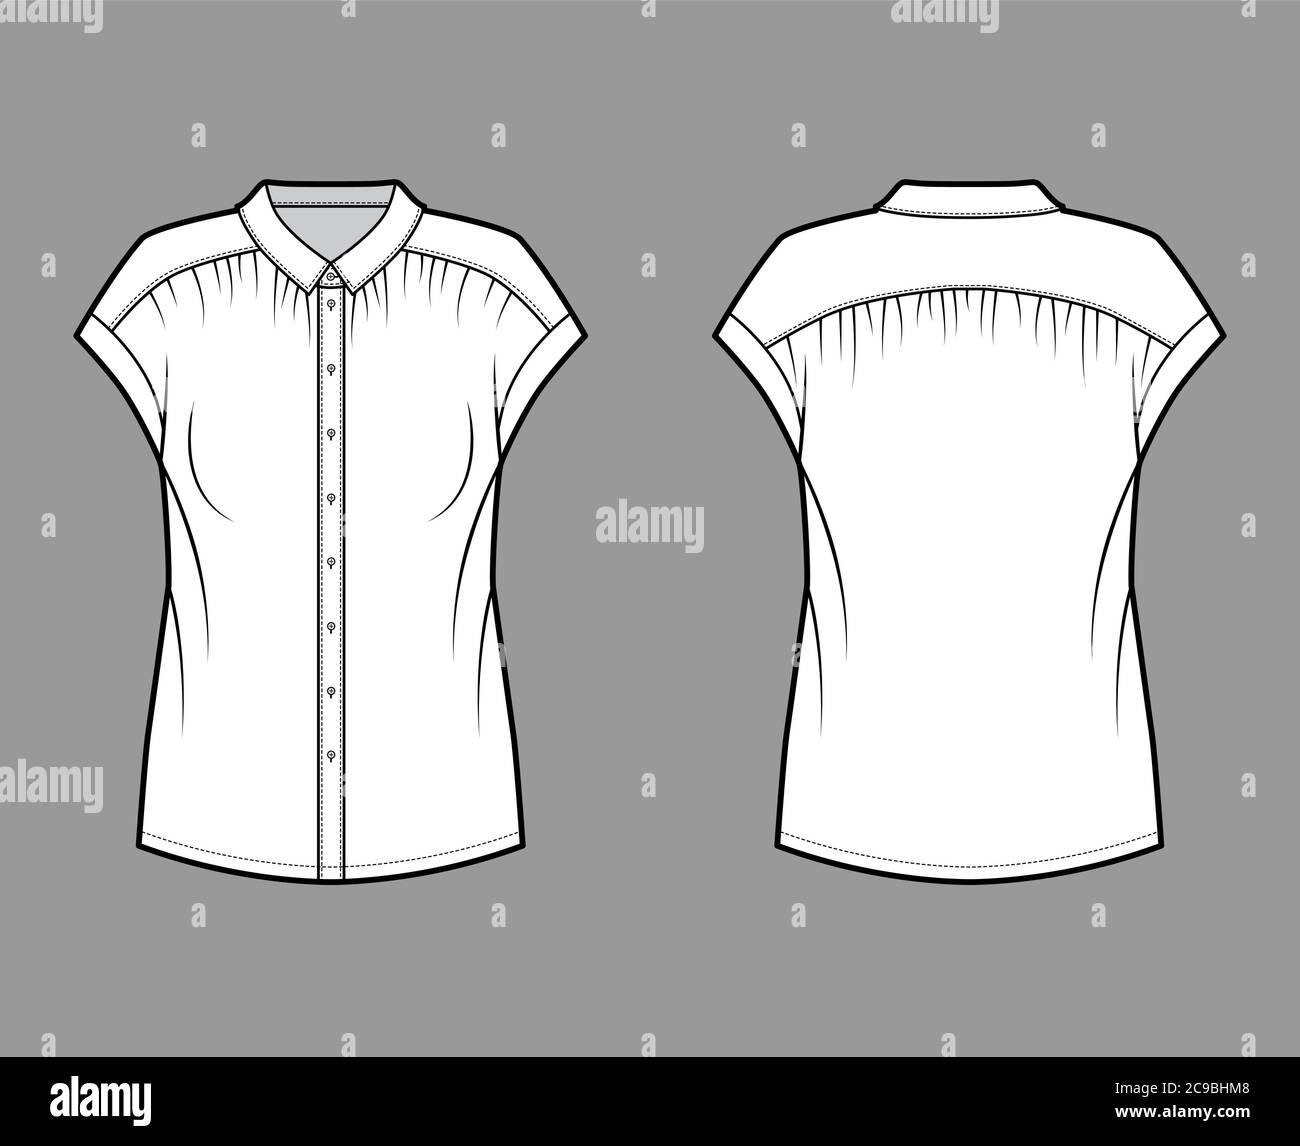 Gentle pleats shirt technical fashion illustration with loose silhouette, regular colar with stand, sleeveless. Flat blouse apparel template front, back white color. Women, men unisex top CAD mockup Stock Vector